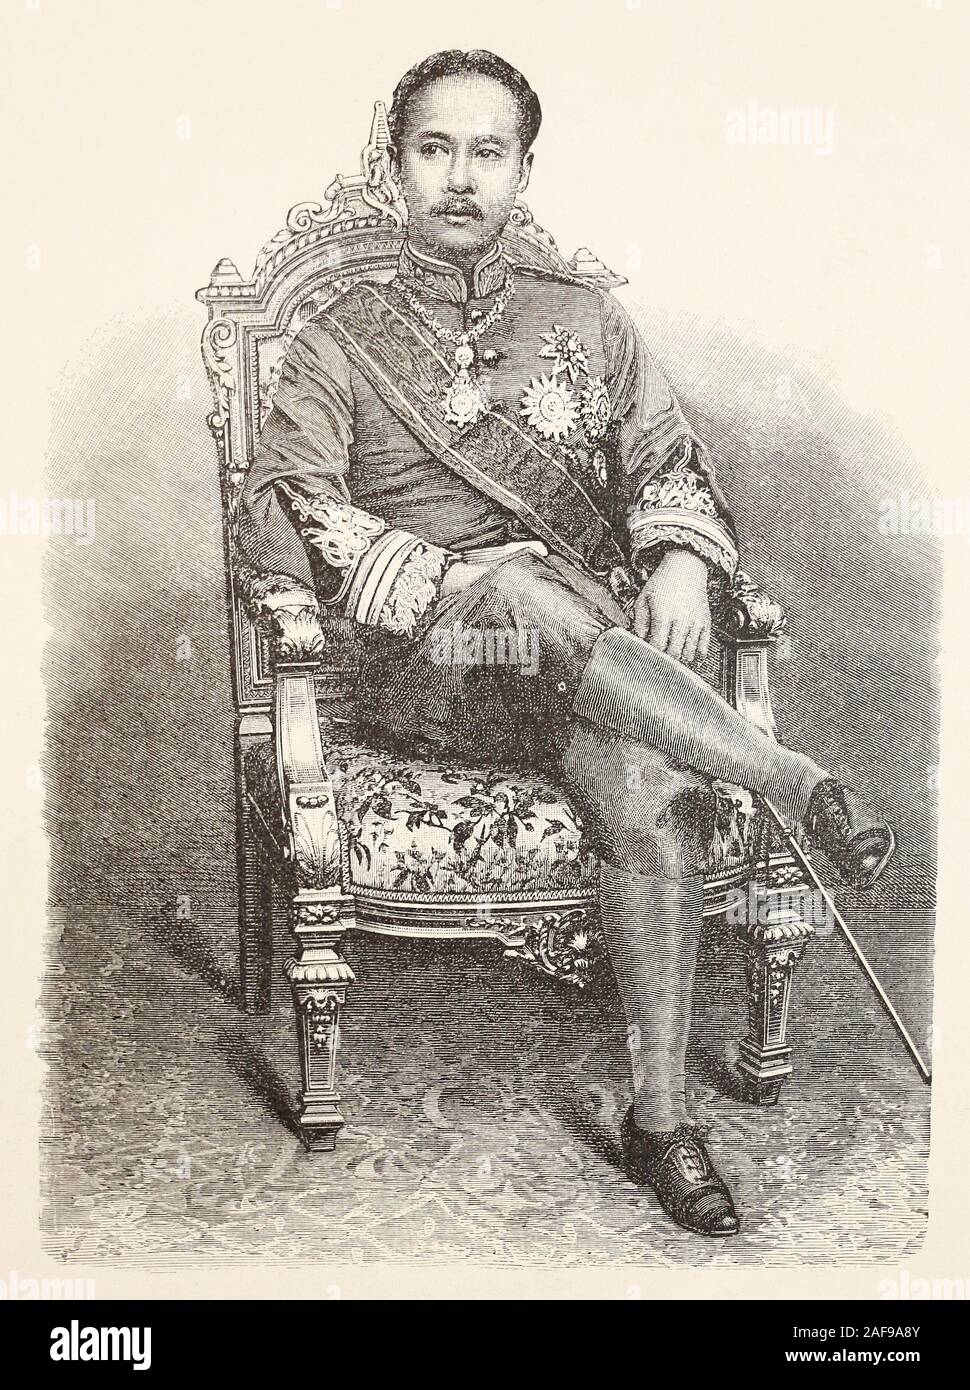 King of Siam (Thailand) Rama V Chulalongkorn. Engraving of the end of the 19th century. Stock Photo